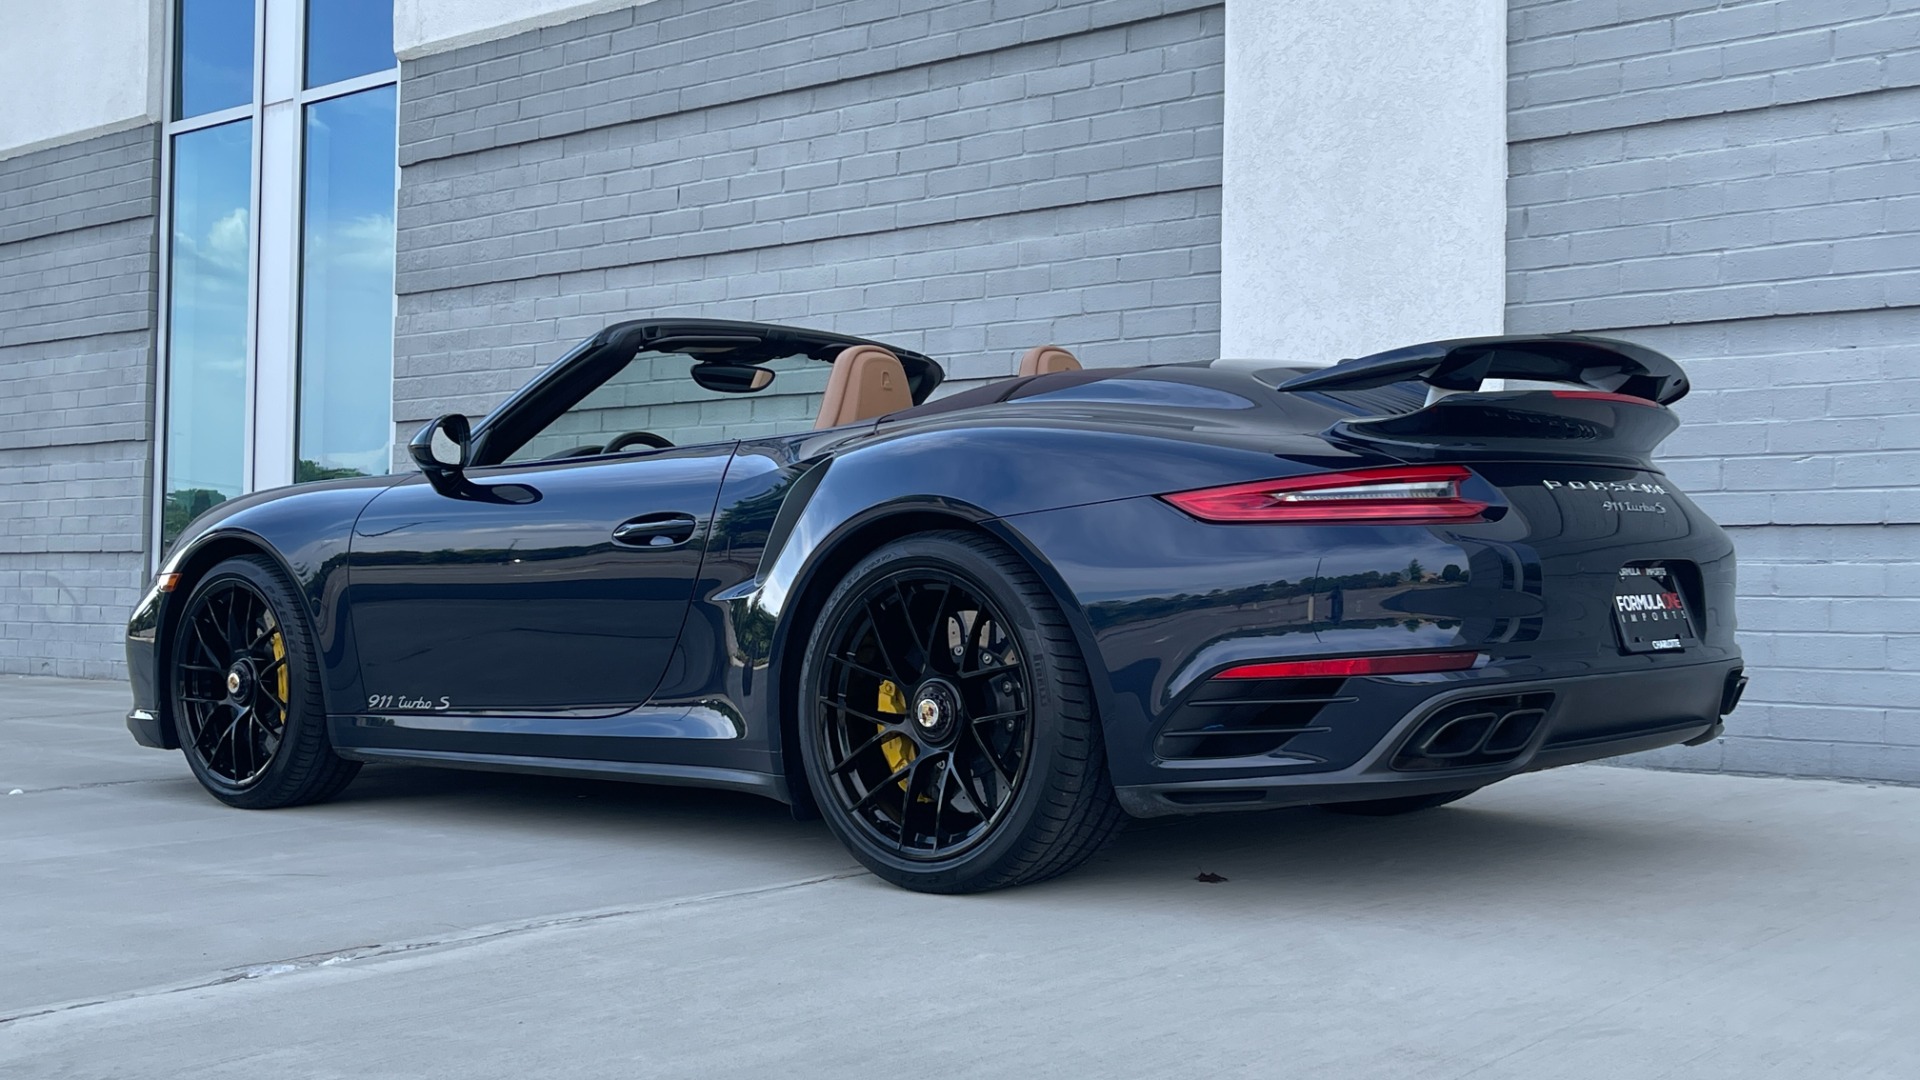 Used 2017 Porsche 911 Turbo S / CABRIOLET / FRONT LIFT / PDK / 20IN WHEELS for sale $179,999 at Formula Imports in Charlotte NC 28227 5